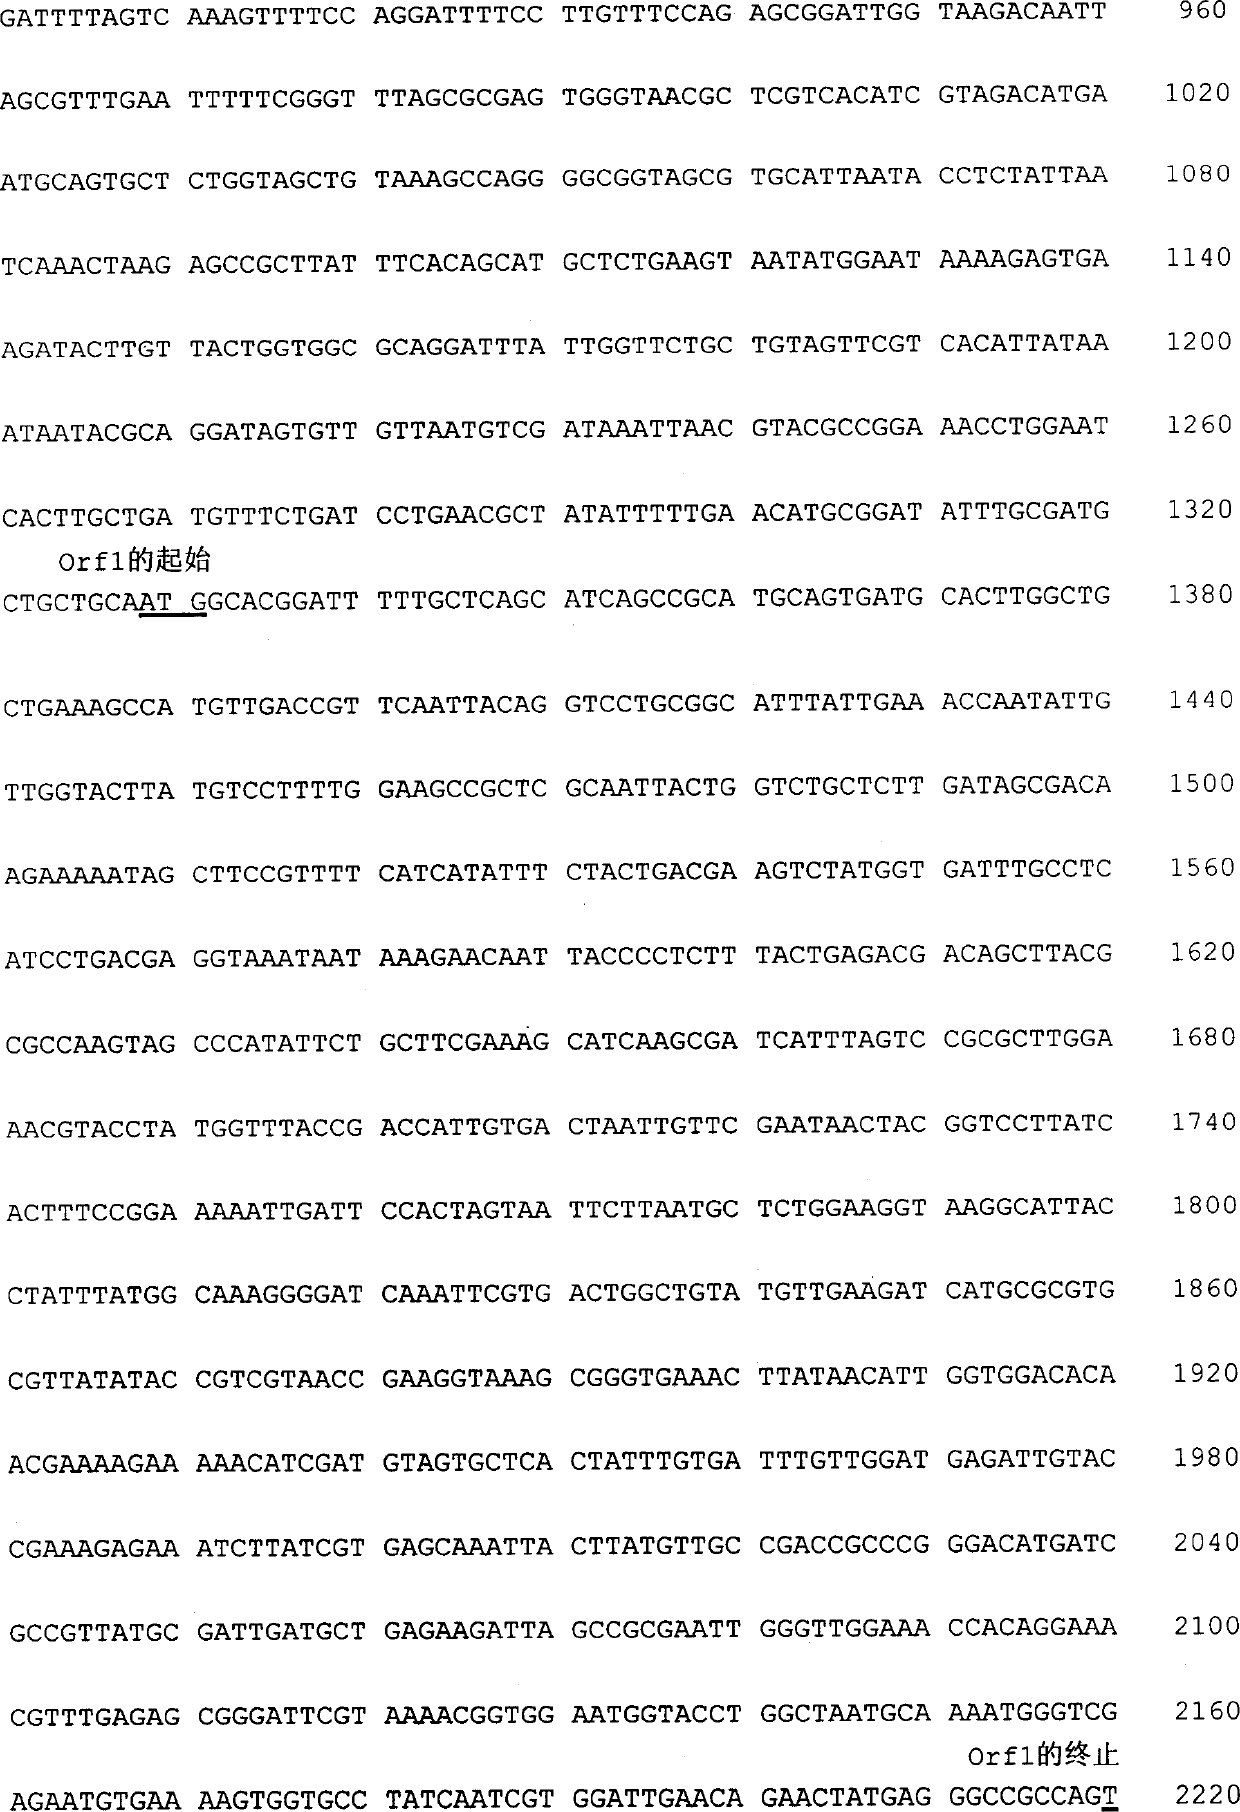 Nucleotide with specificity to o-antigen of type-12 shigella shigae and colibacillus 0152